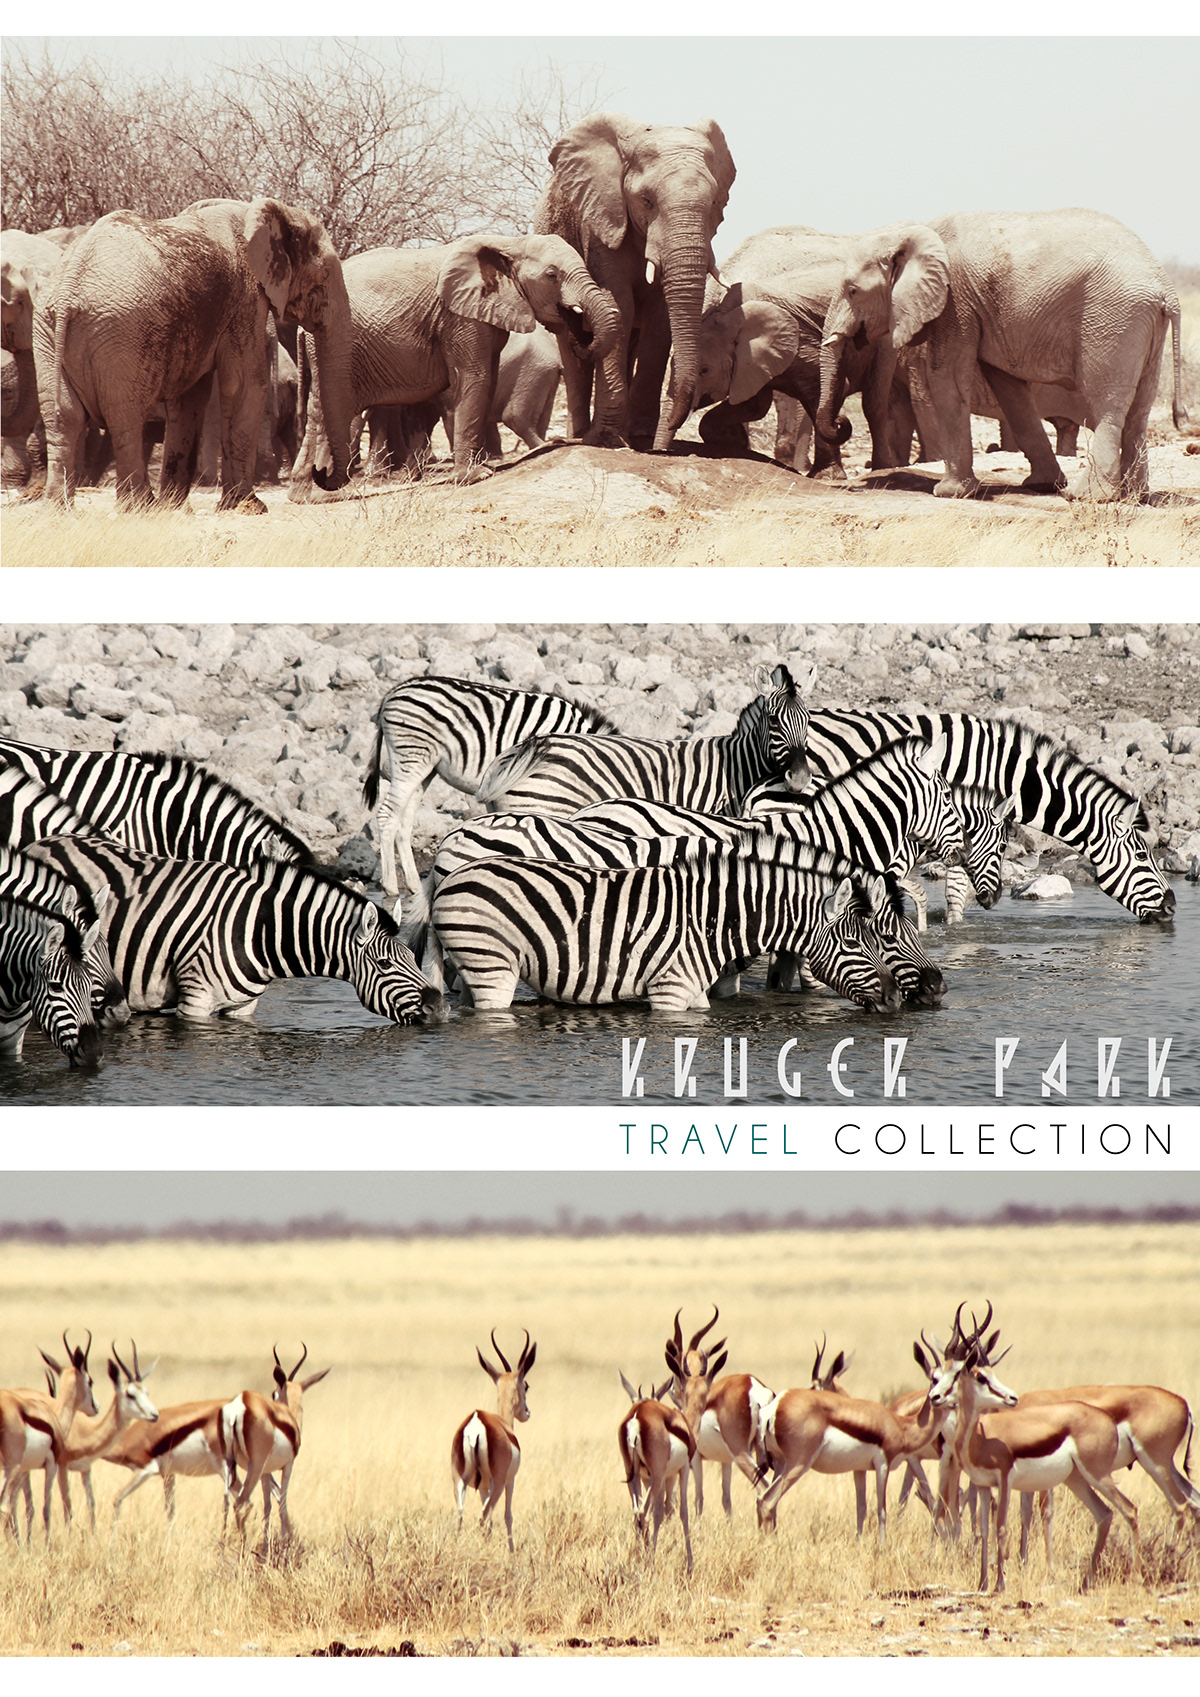 Travel Collection south africa